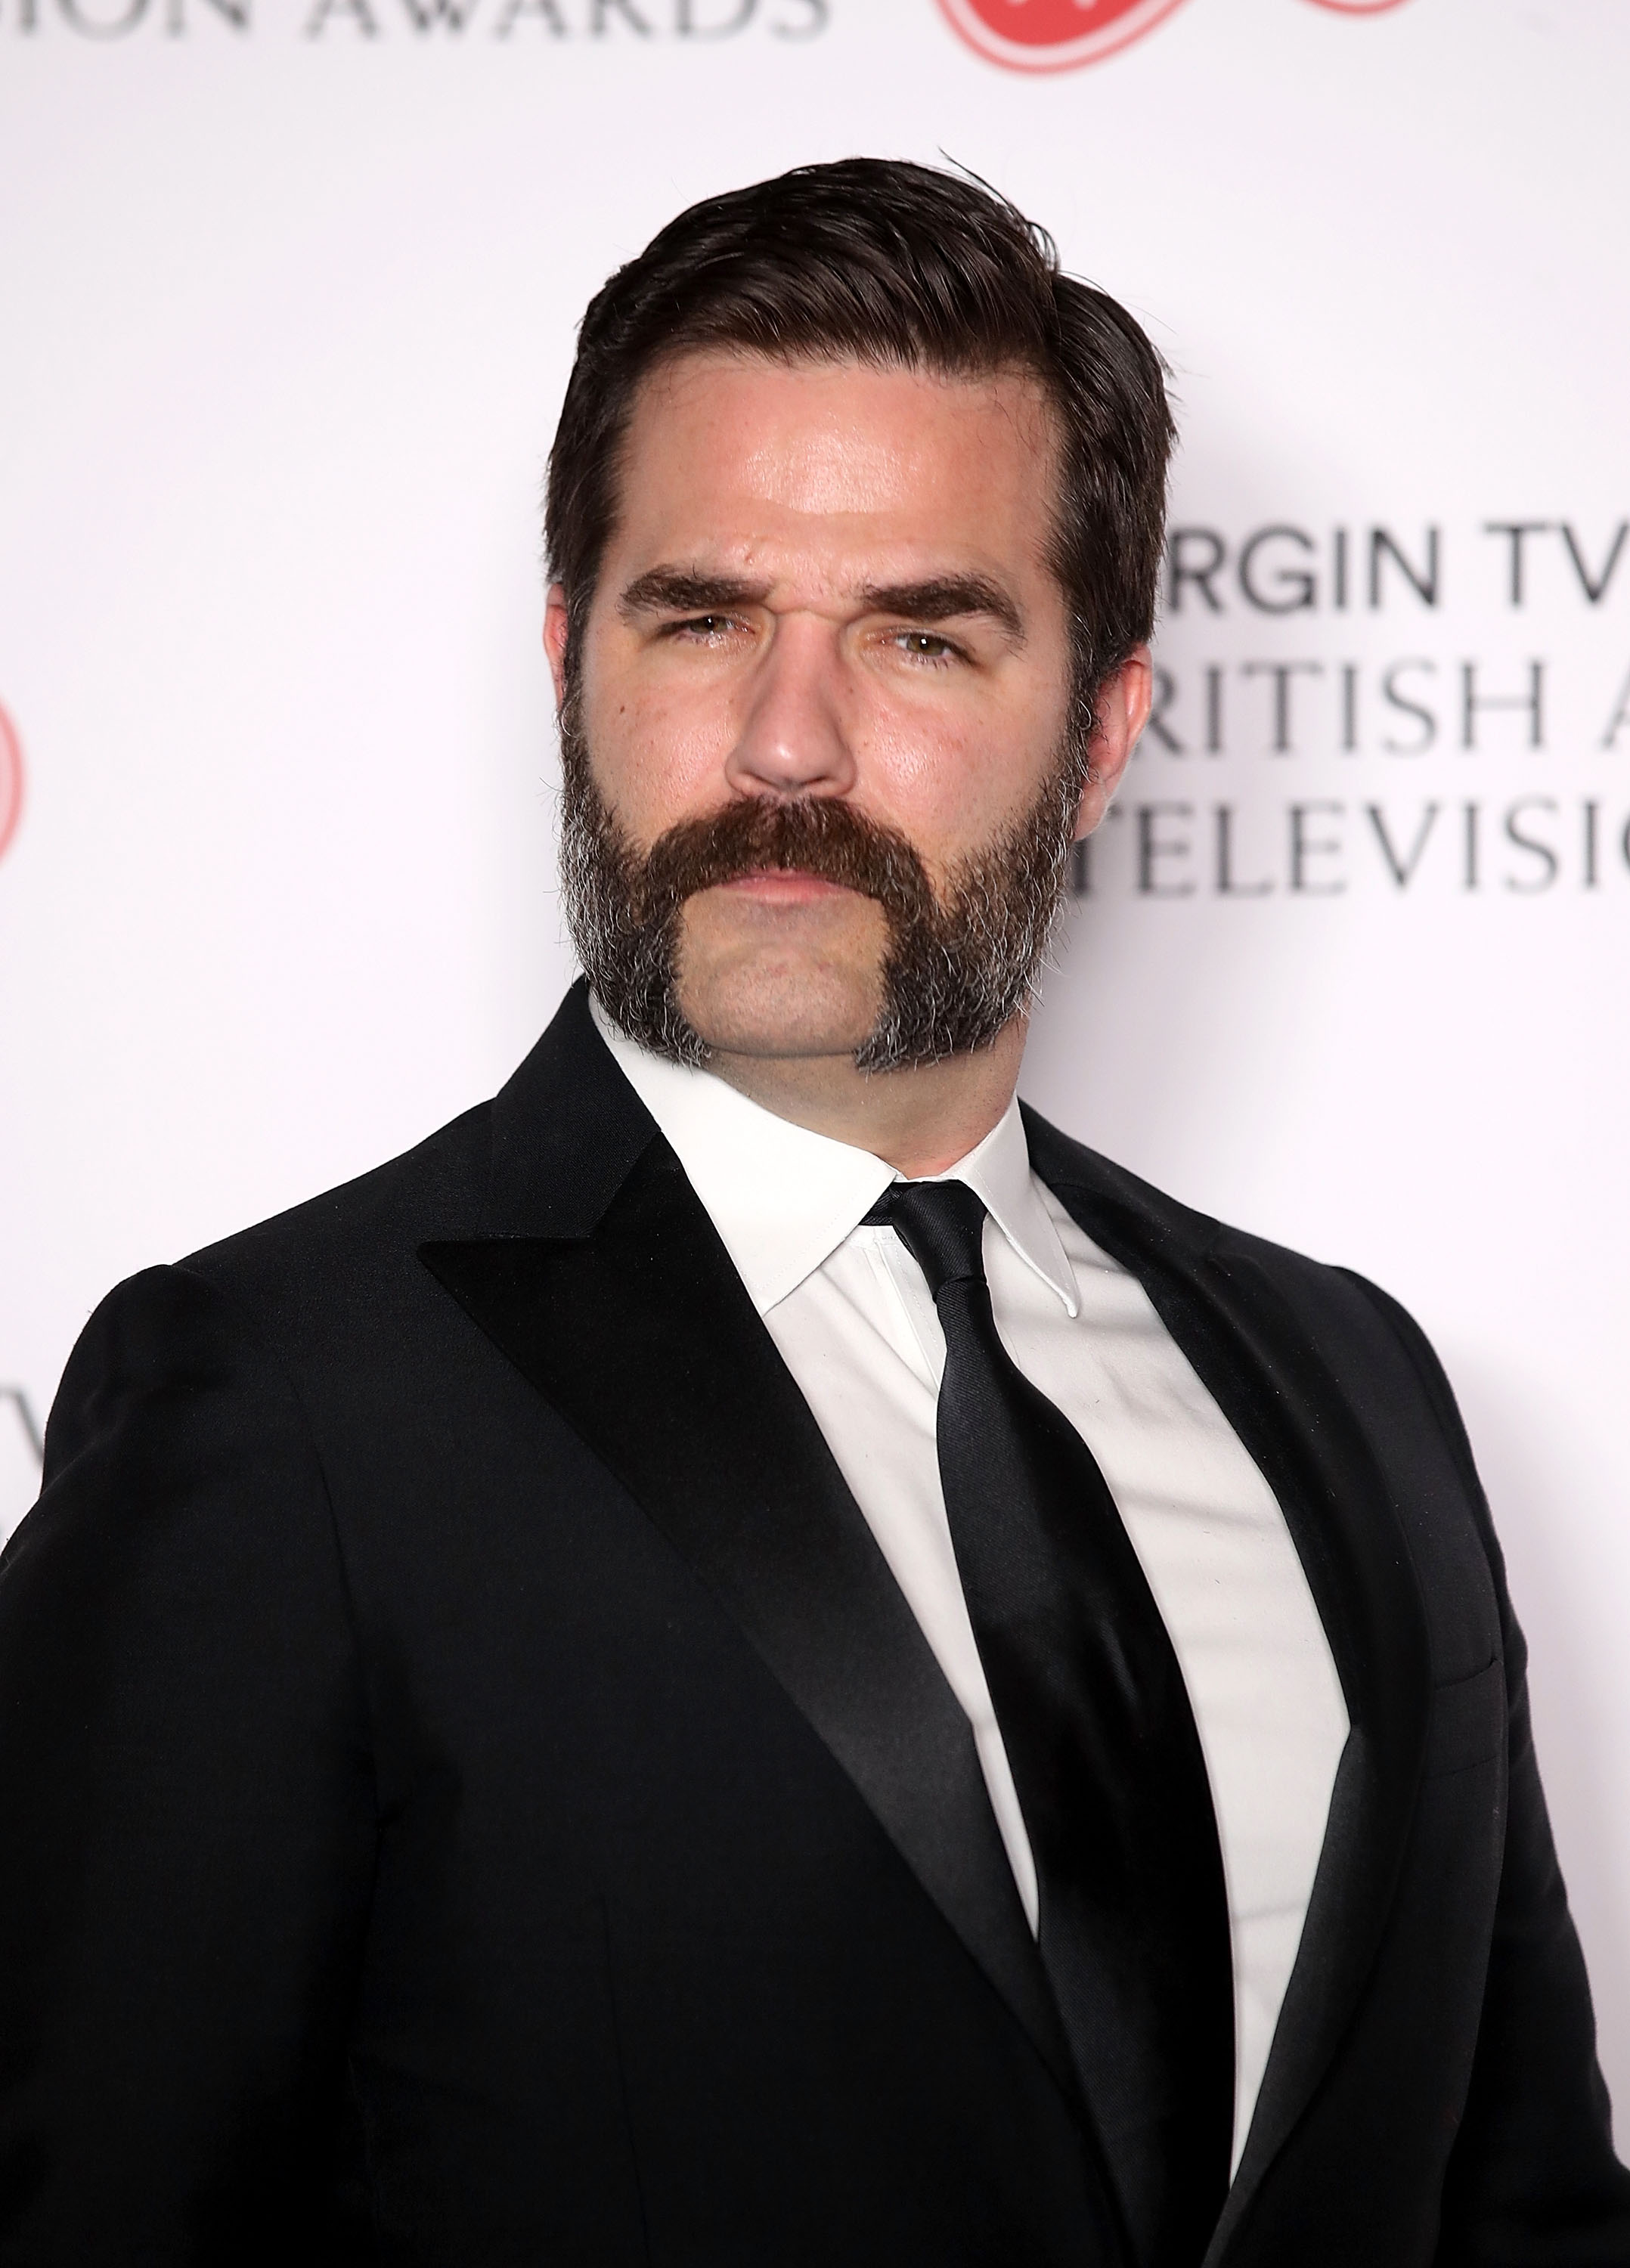 Rob Delaney at The Royal Festival Hall on May 14, 2017, in London, England. | Source: Getty Images